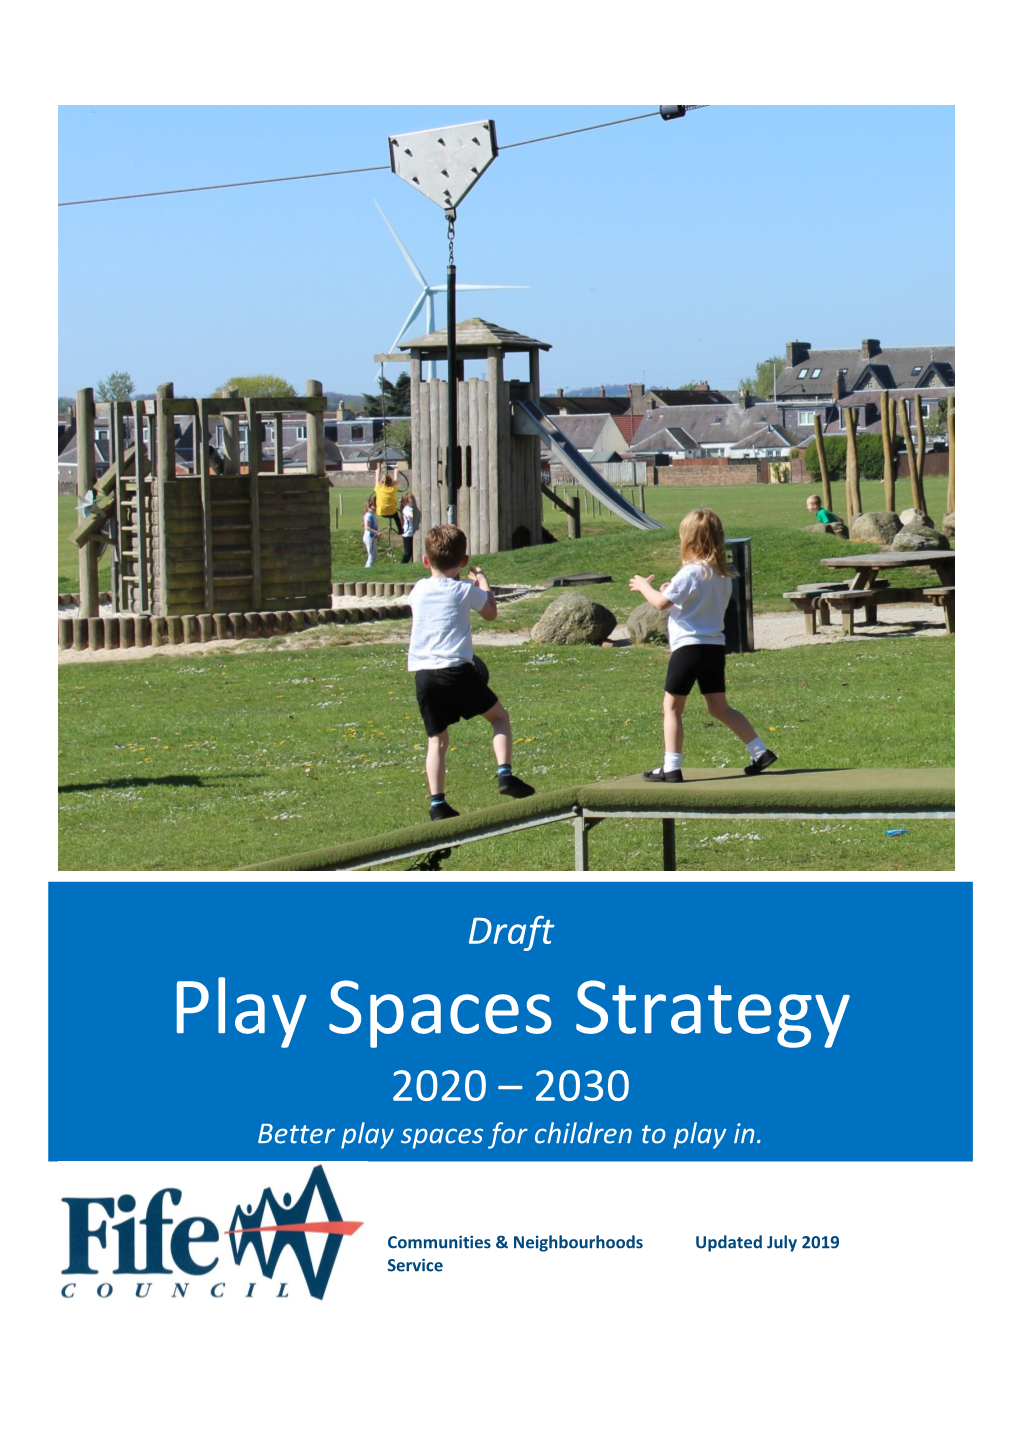 Play Spaces Strategy (Draft)